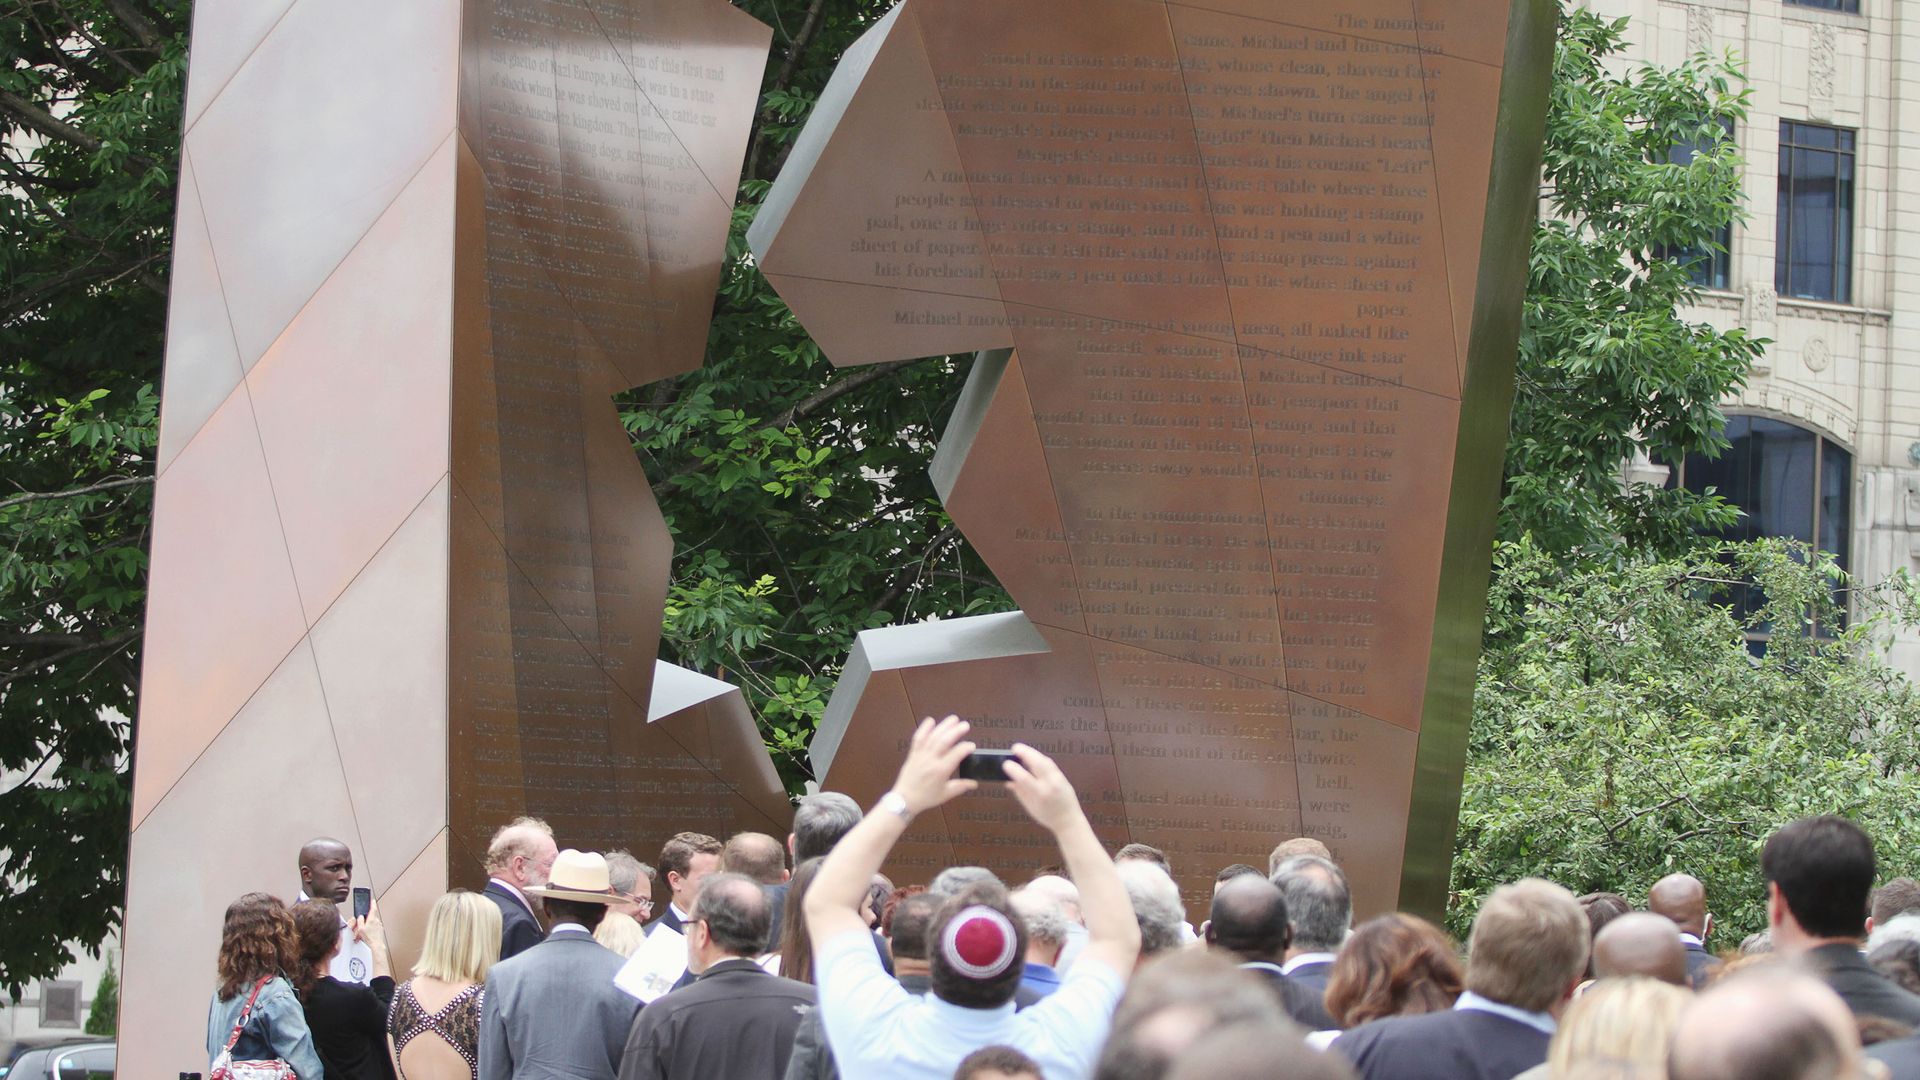 A crowd gathers near a Holocaust memorial in Ohio.